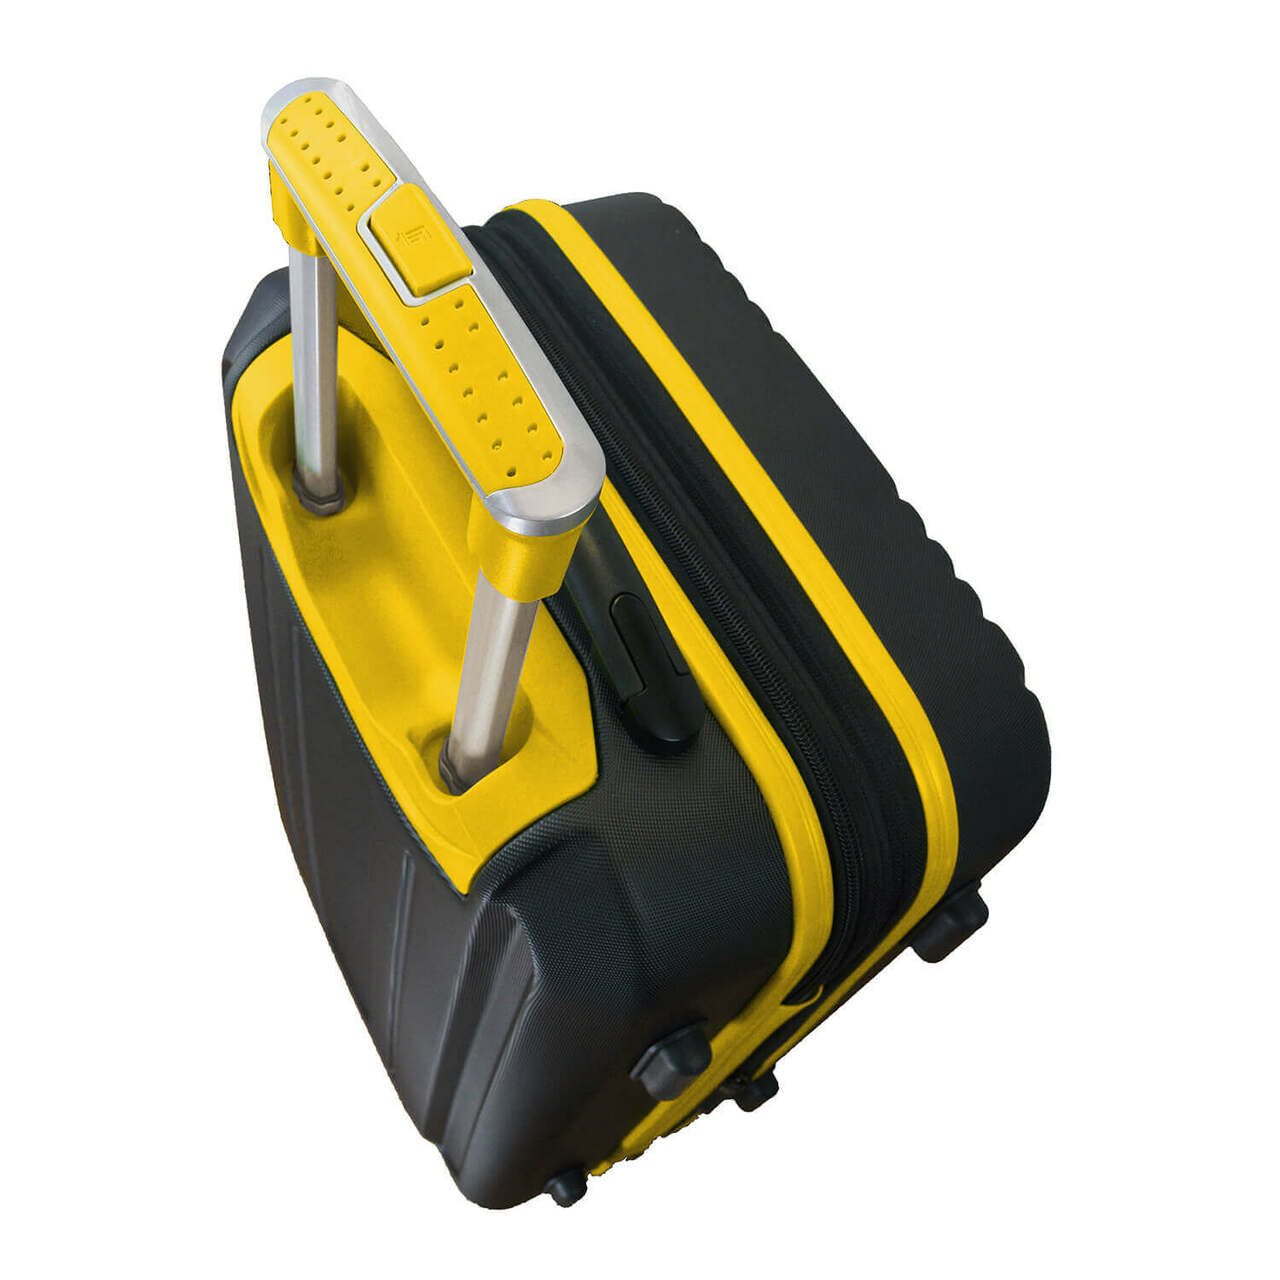 Penguins Carry On Spinner Luggage | Pittsburgh Penguins Hardcase Two-Tone Luggage Carry-on Spinner in Yellow